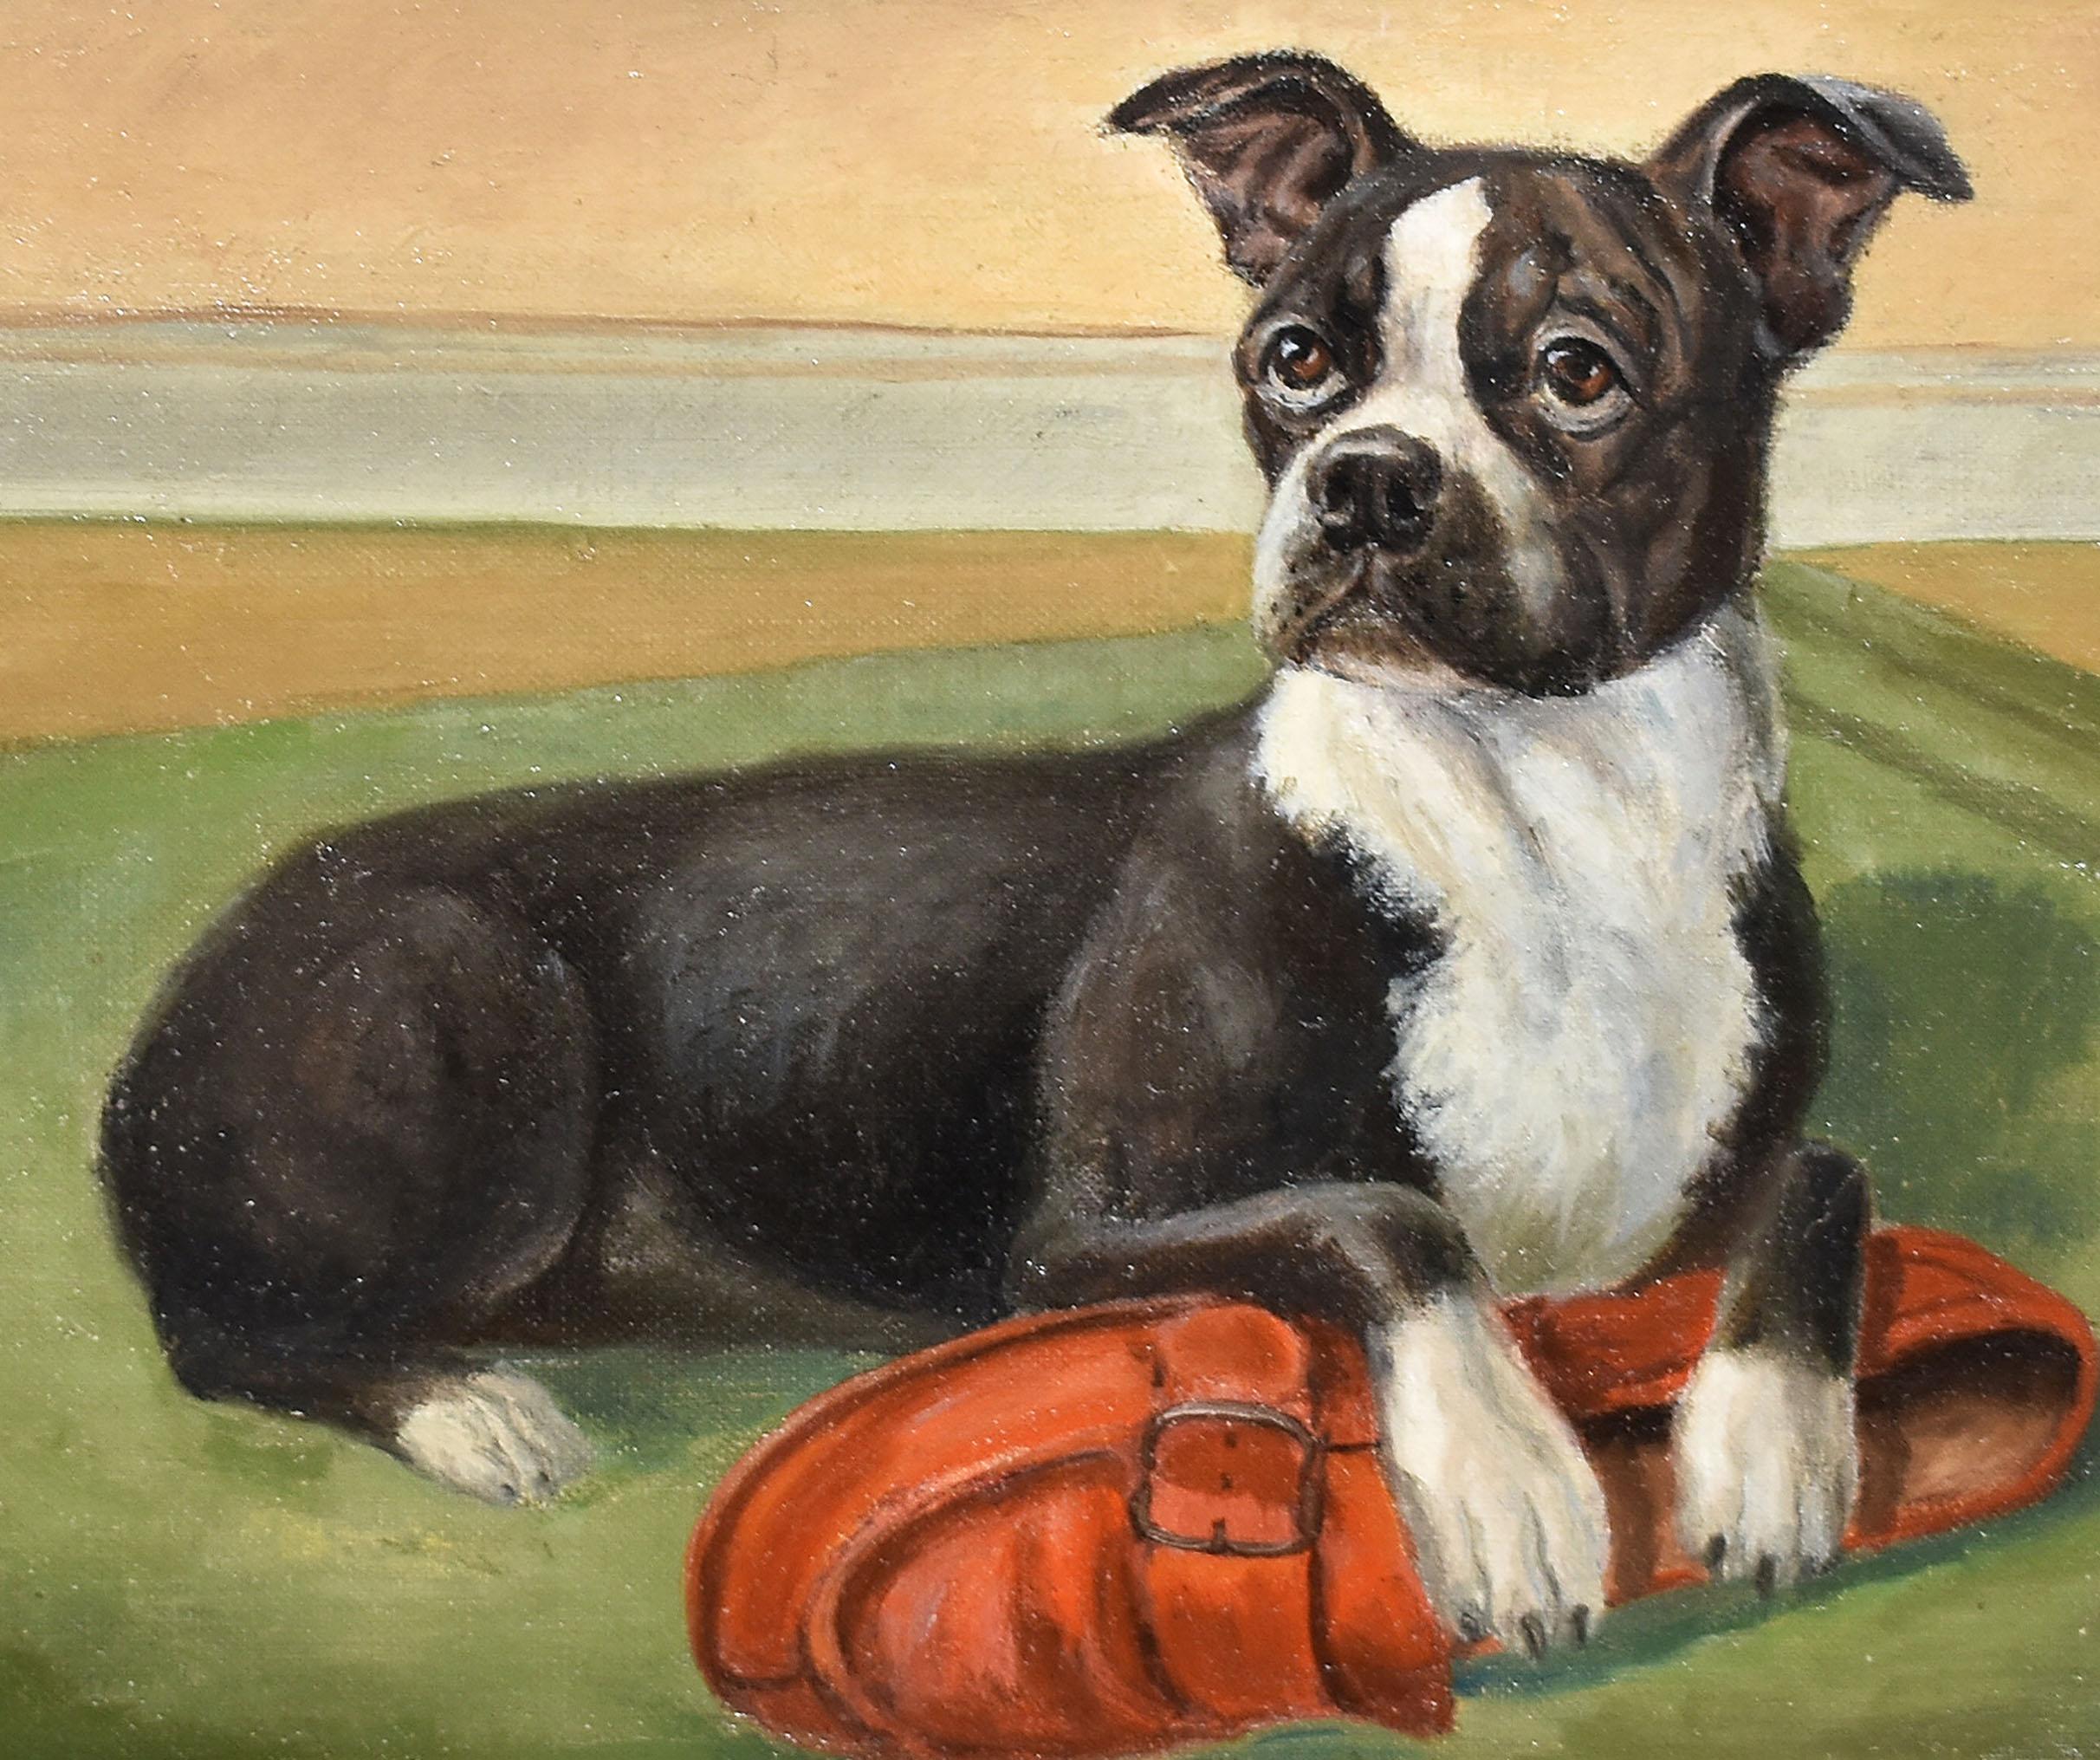 Antique American painting of a dog and shoe by Frank Childers.  Oil on canvas, circa 1900.  Signed.  Displayed in a period giltwood  frame.  Image size, 12